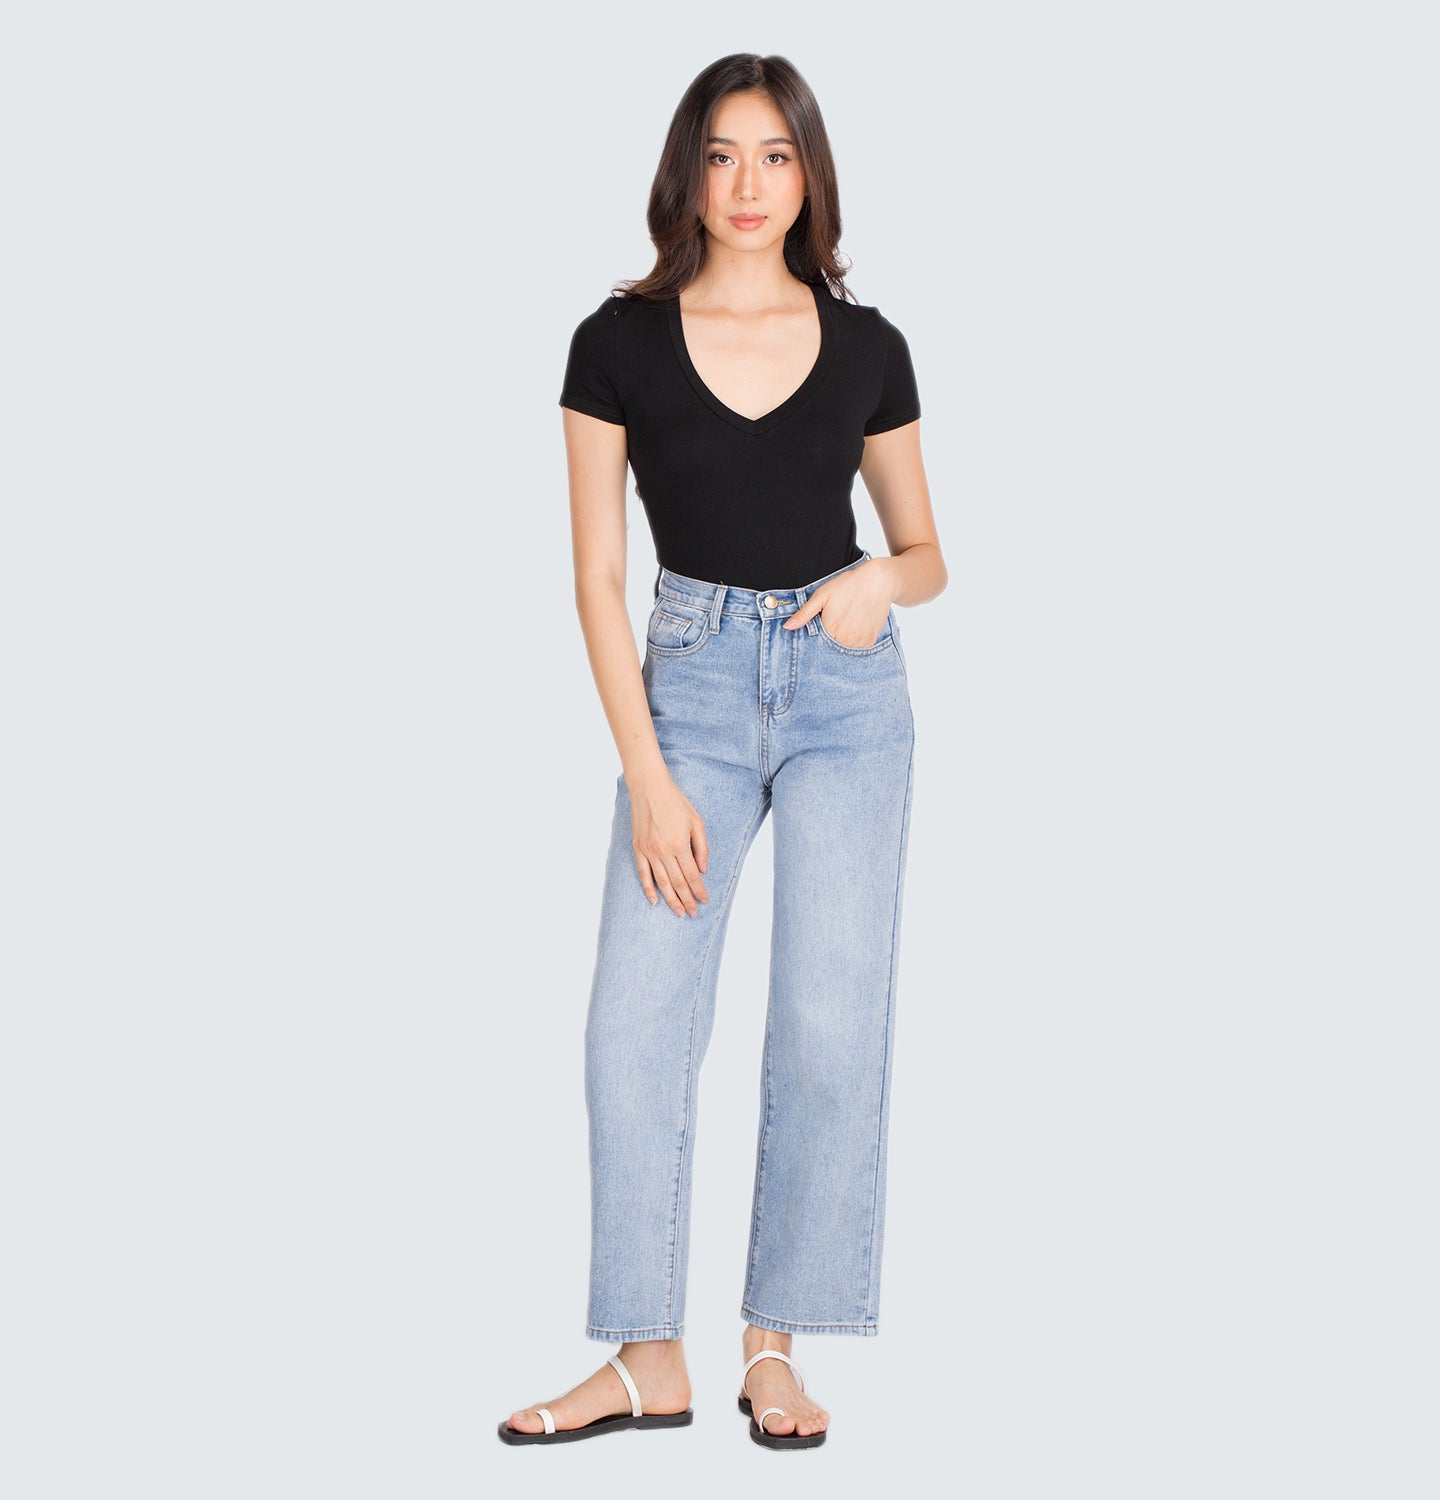 Ally Groove Pants — A Lotus Connection